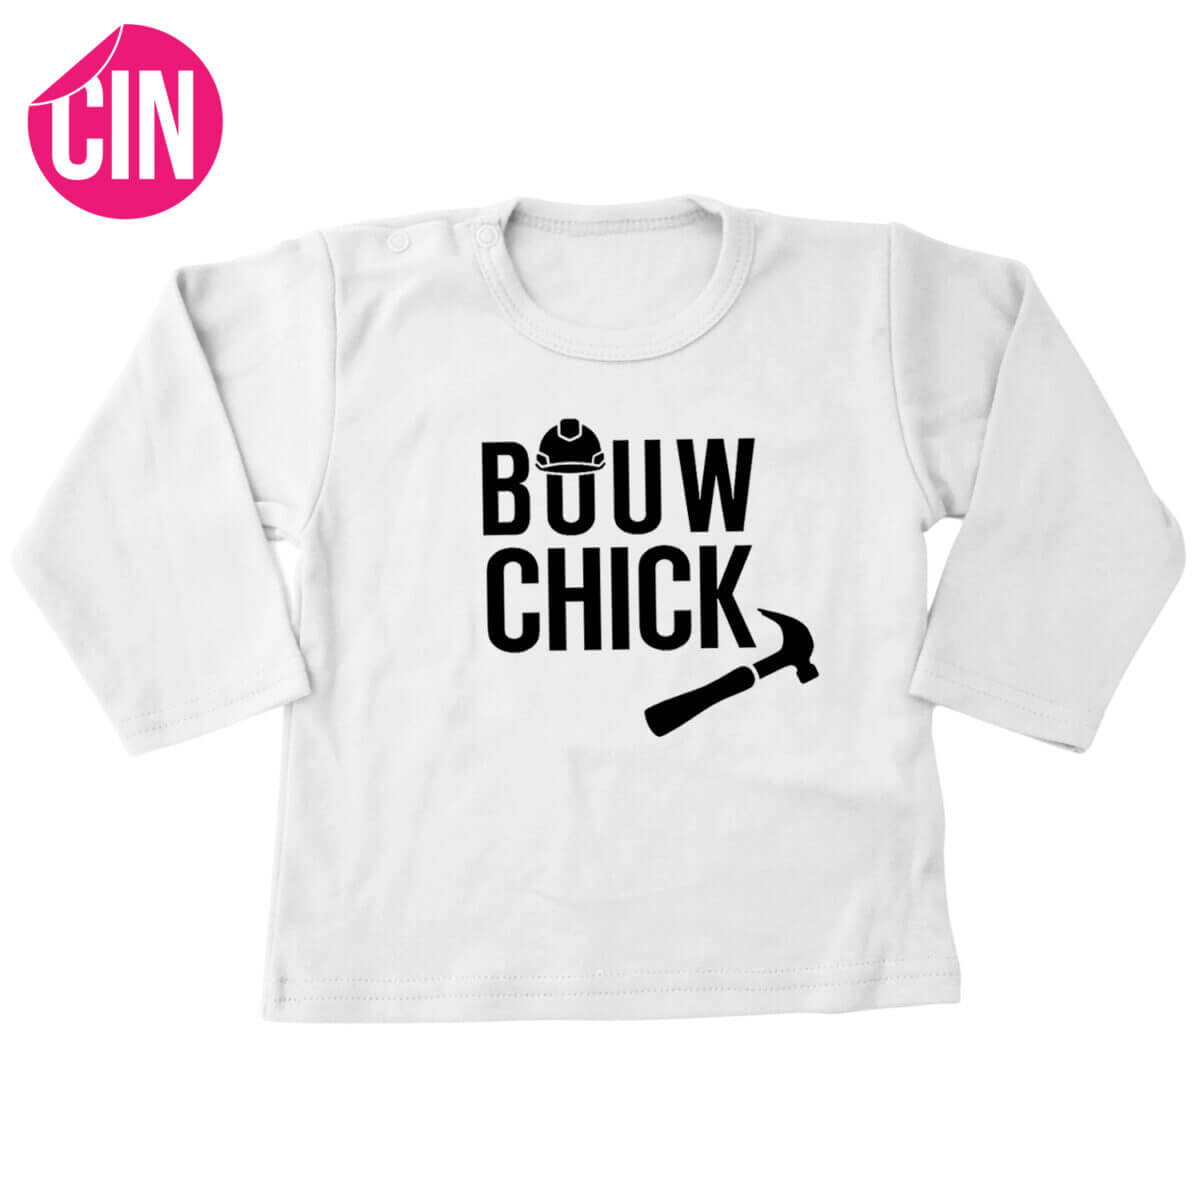 bouw chick cindysigns